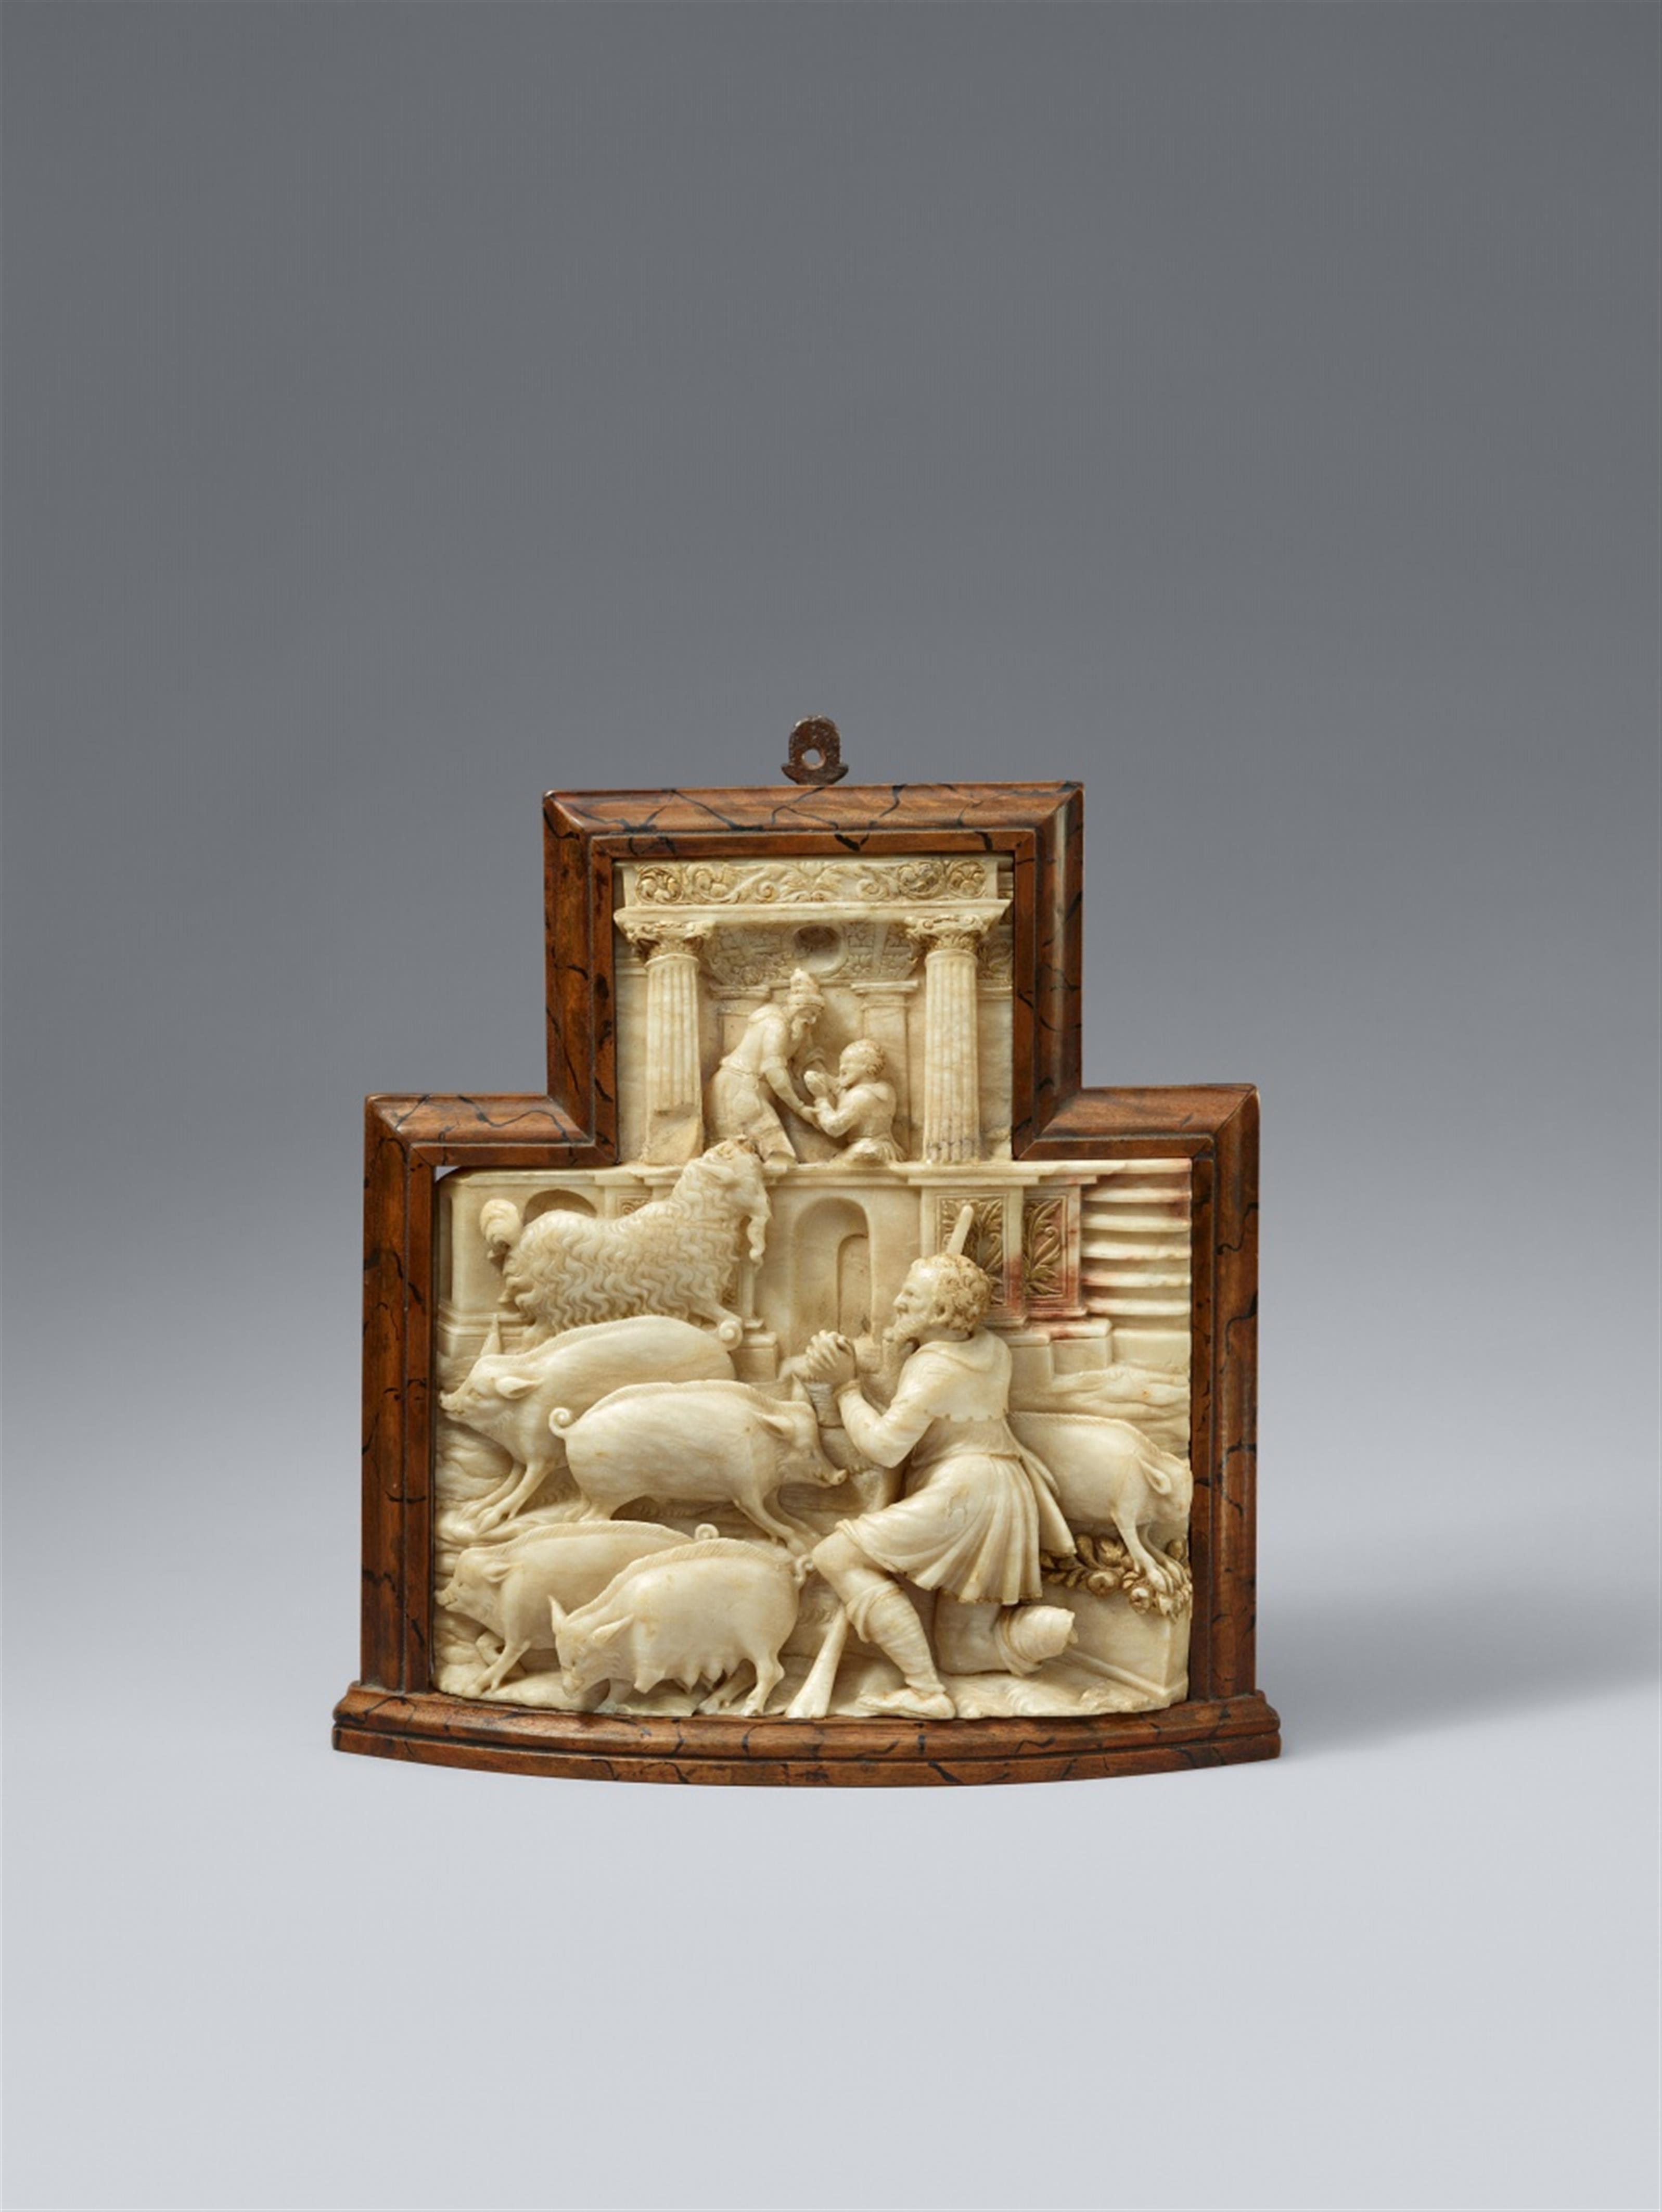 Flemish mid-16th century - A mid-16th century Flemish alabaster relief with scenes from the parable of the prodigal son - image-1